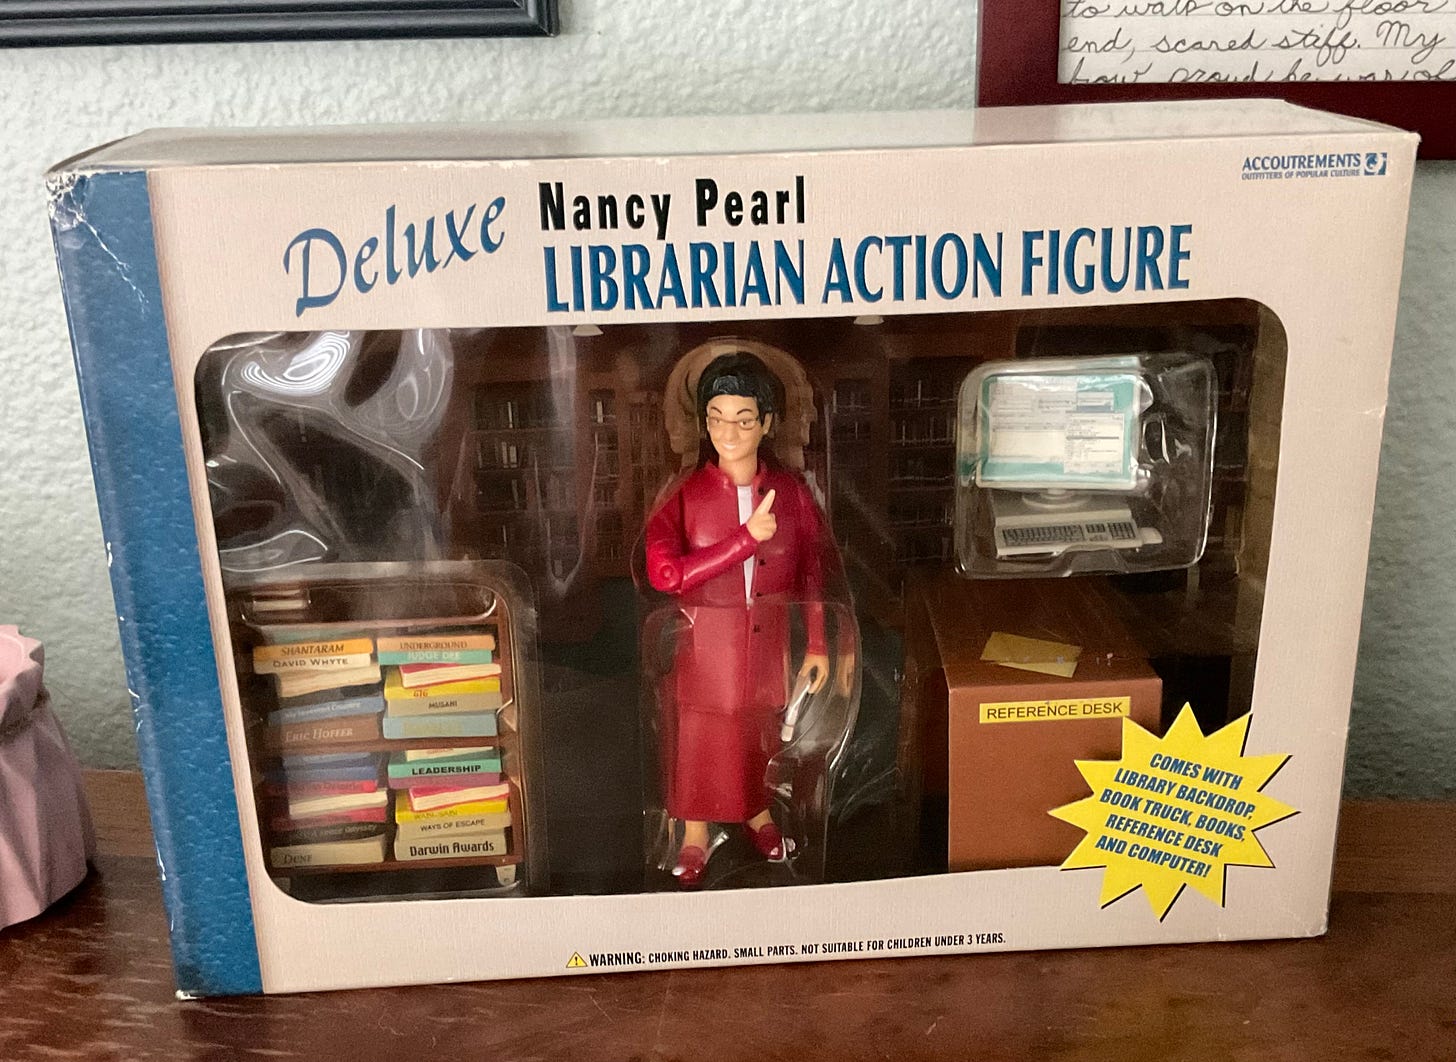 A librarian action figure with accessories. The librarian is wearing a red suit. The accessories include a desk, a cart full of books, a computer, and a library backdrop. 